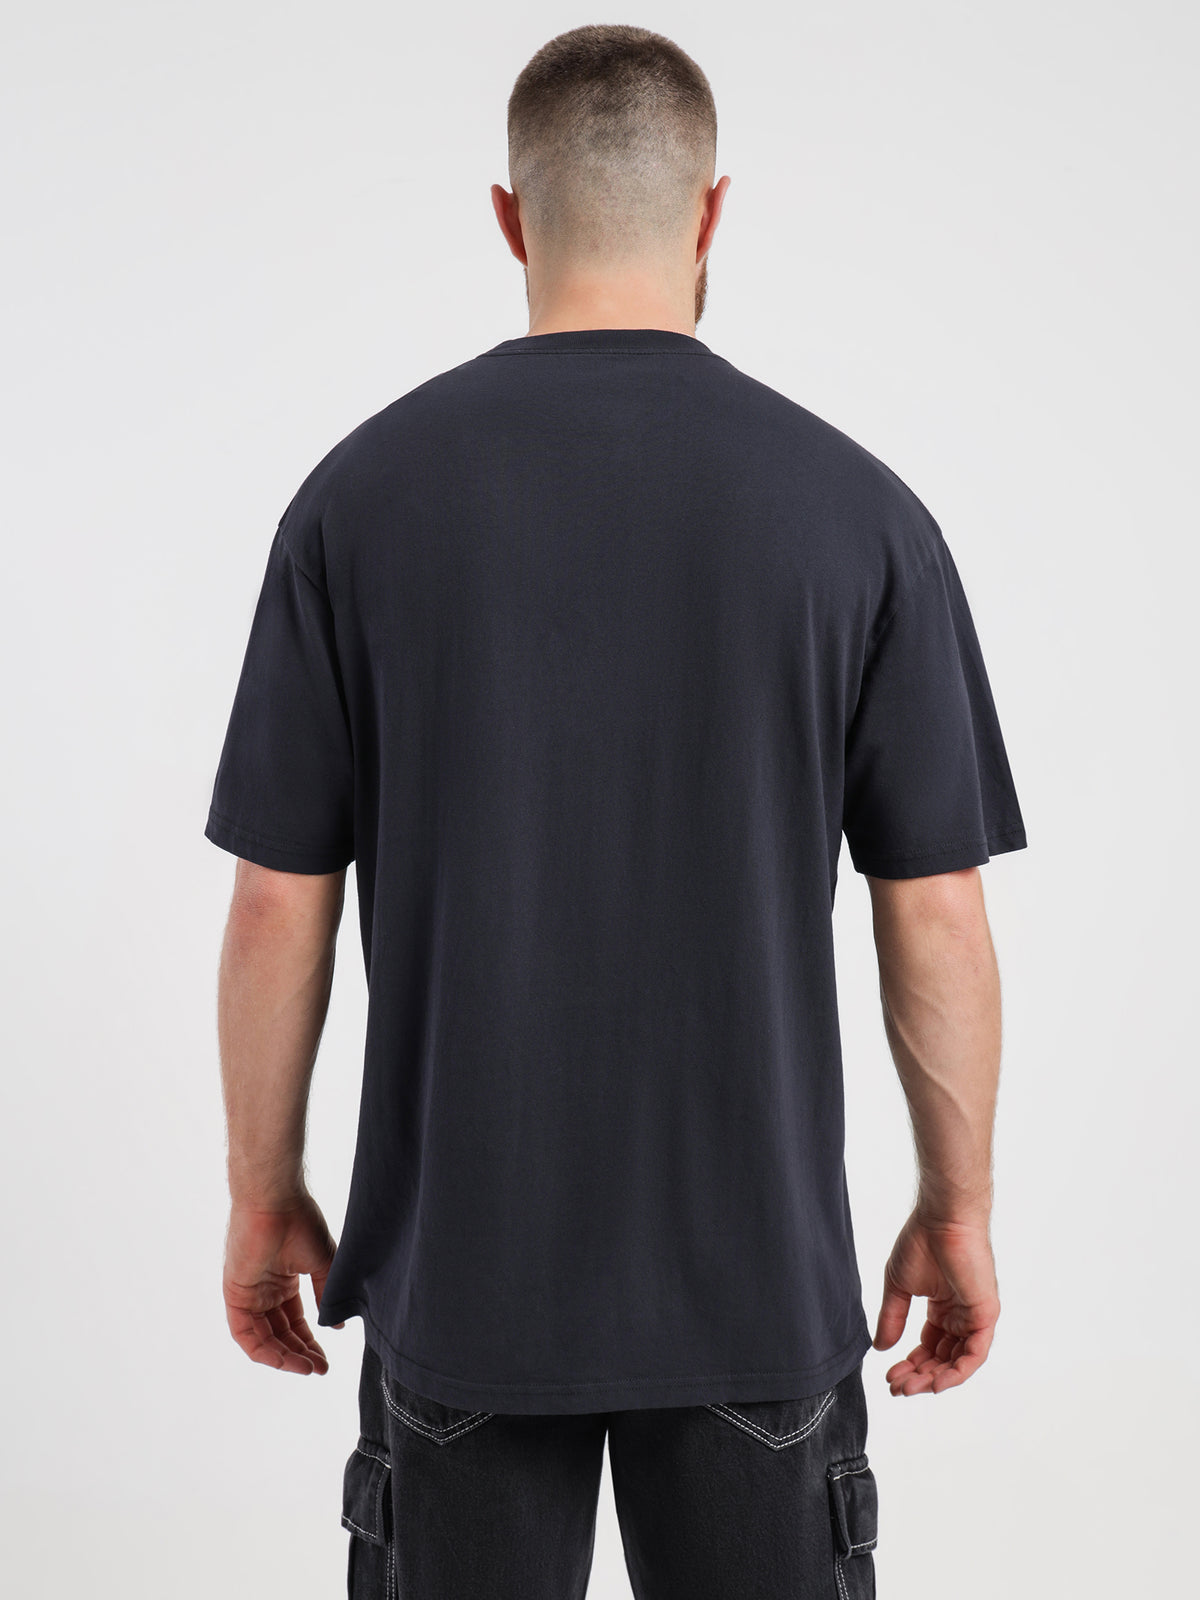 Incline Stack Lakers T-Shirt in Faded Black